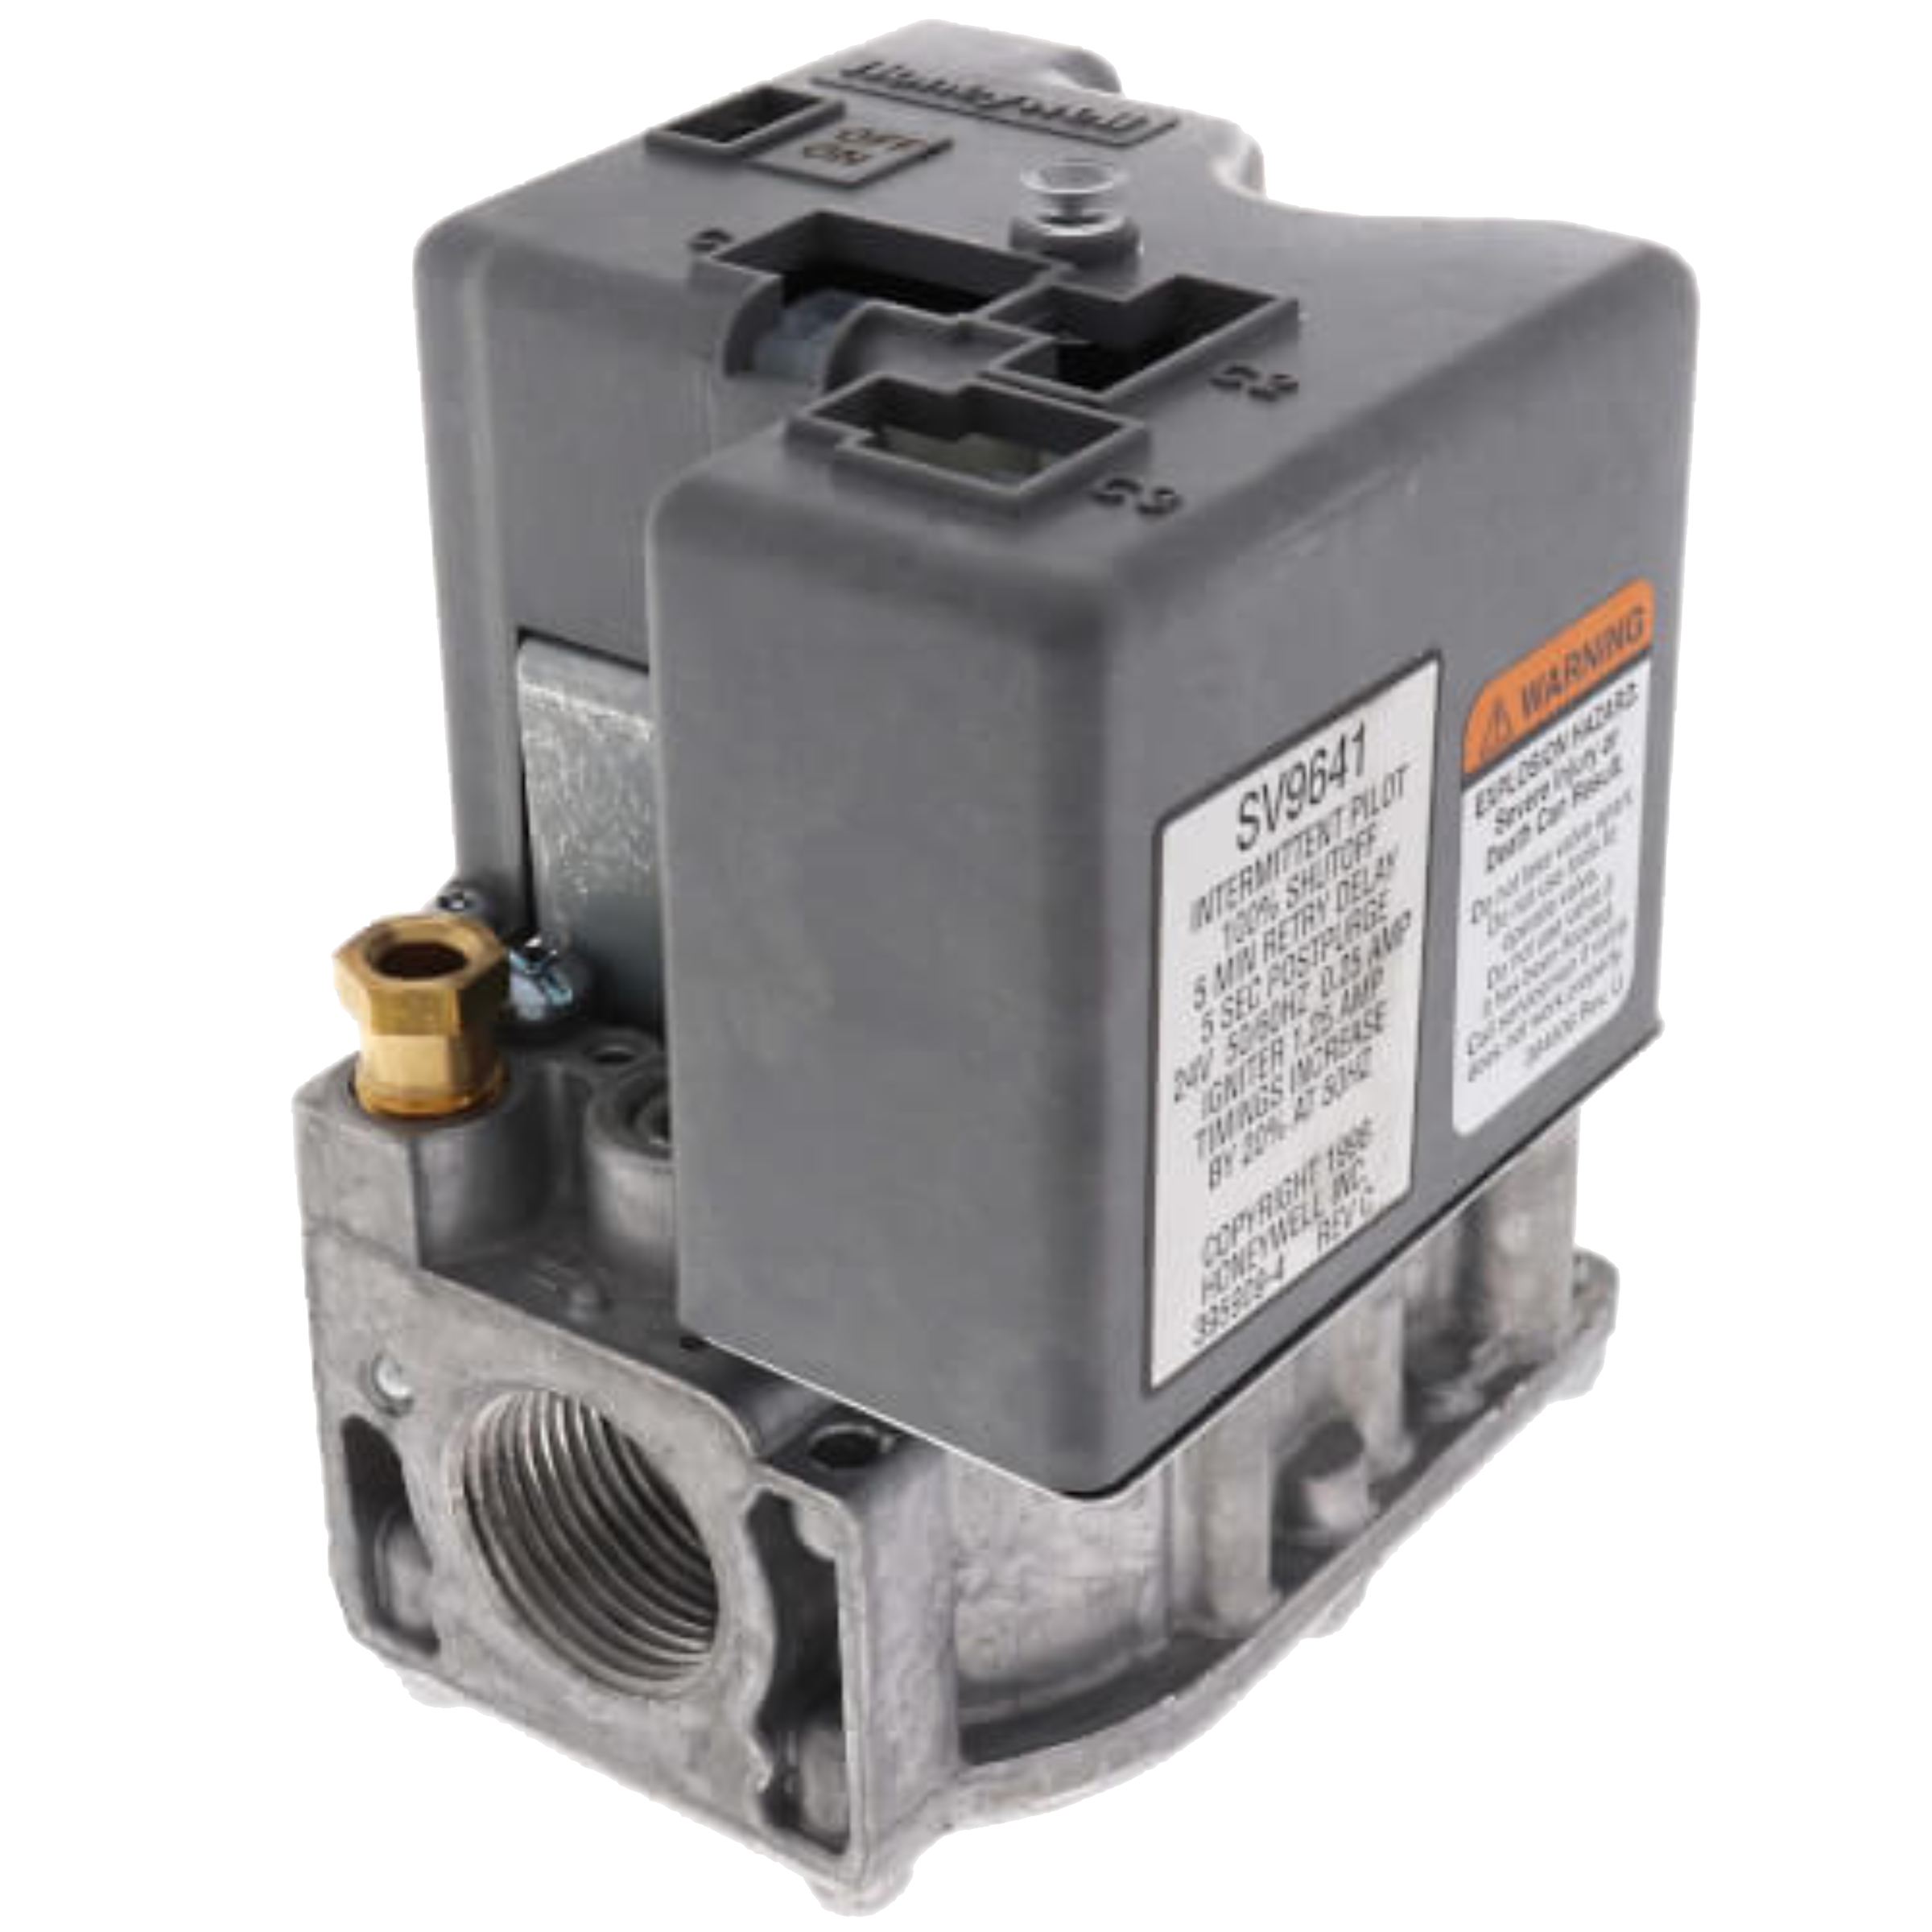 SV9641M4510 Honeywell Home Intermittent Pilot Gas Control with Combustion Air Control. SmartValve®. Standard Opening. 3/4" x 3/4" Set 3.5" WC, Max Capacity 415 ft³/hr